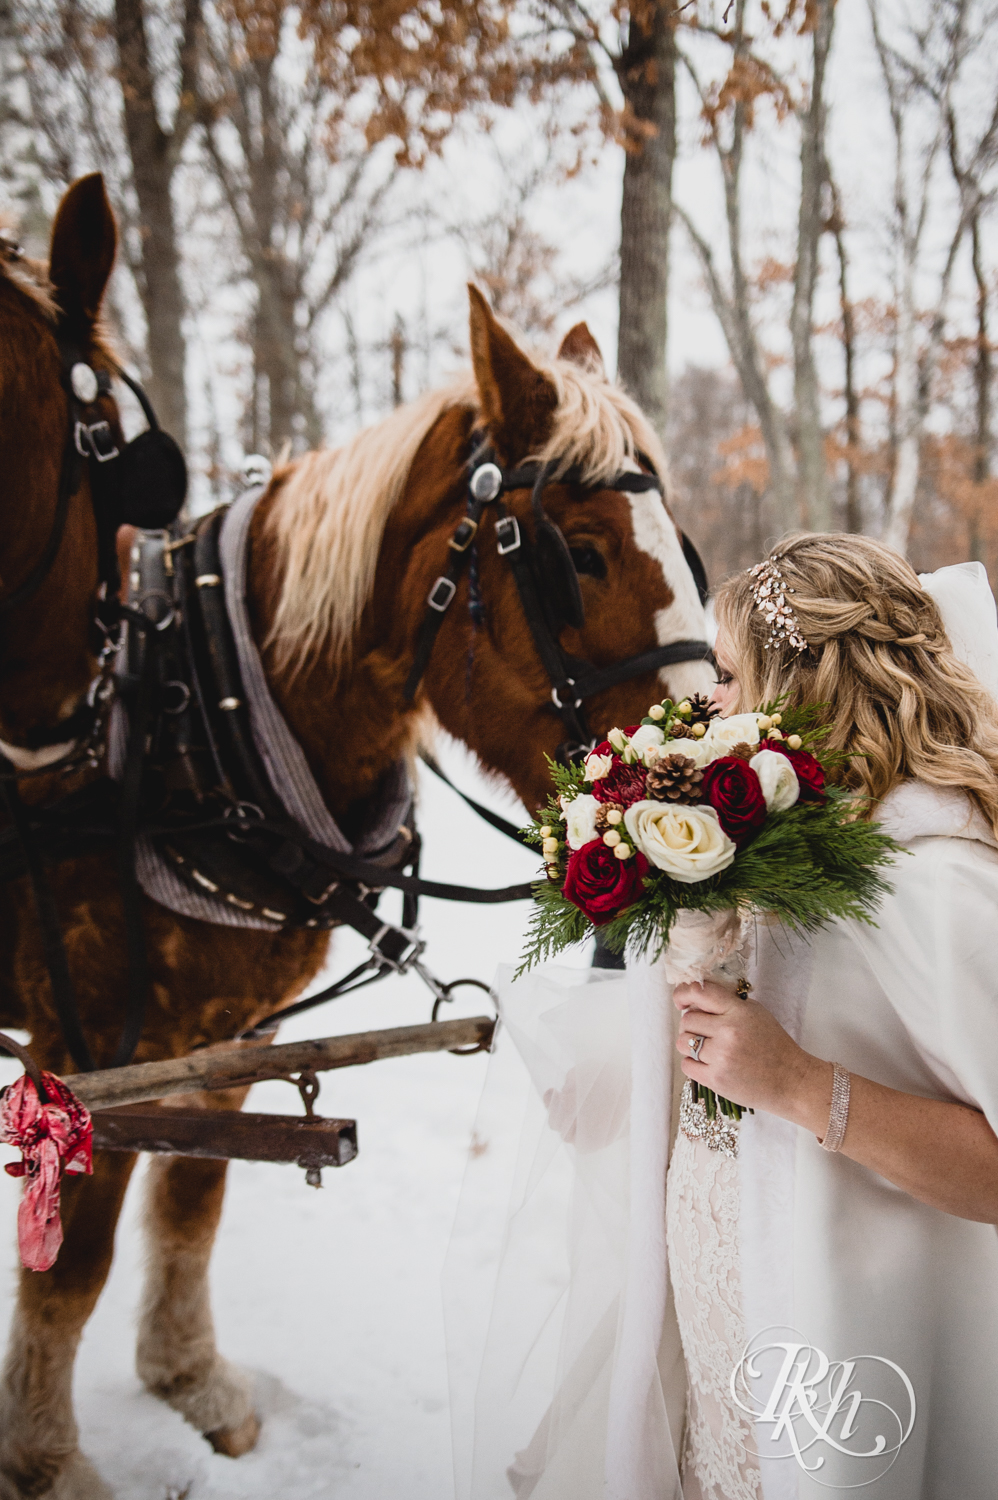 Bride with horse